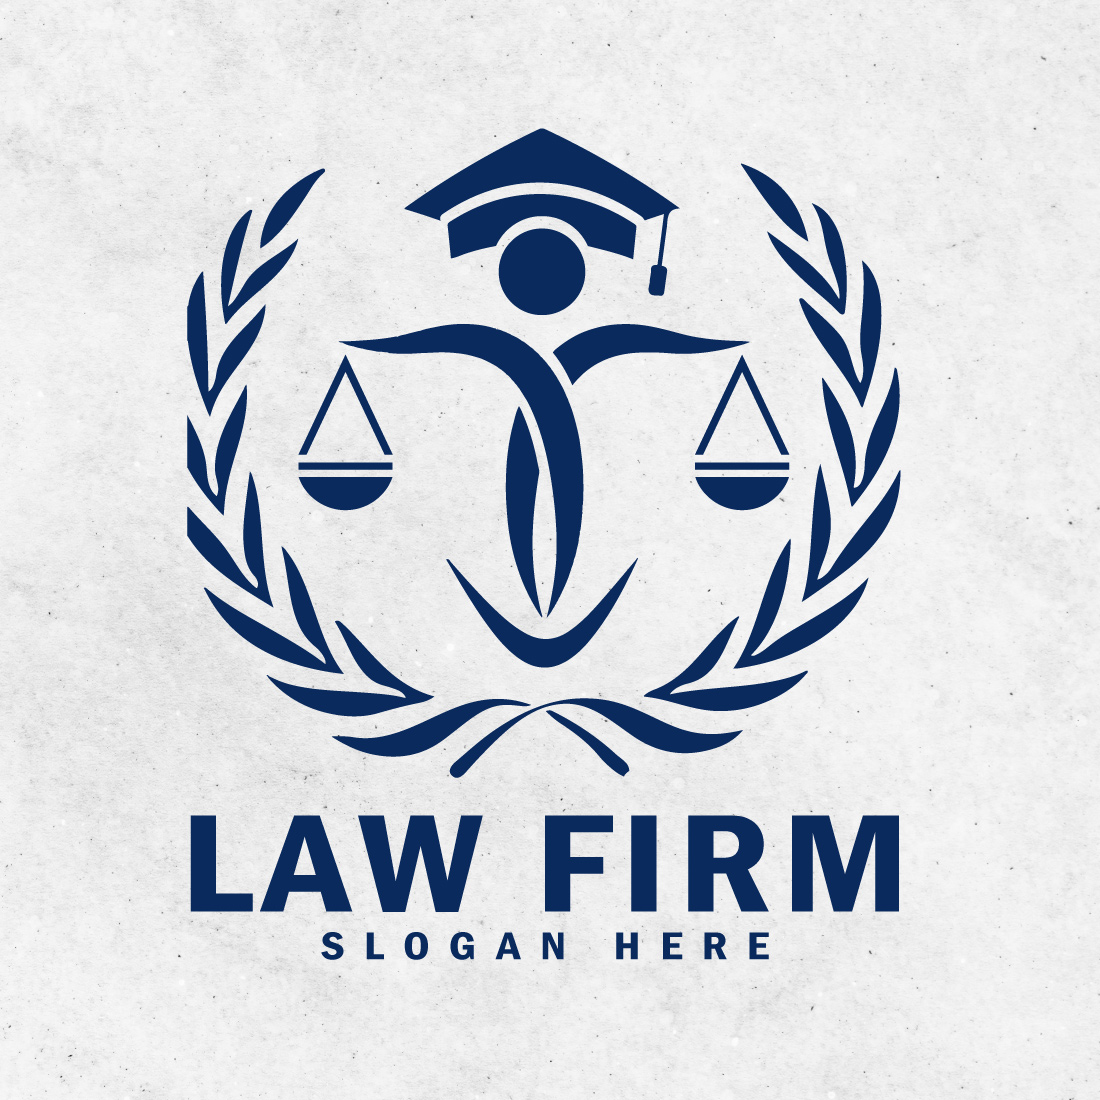 Law firm logo with scales of justice.